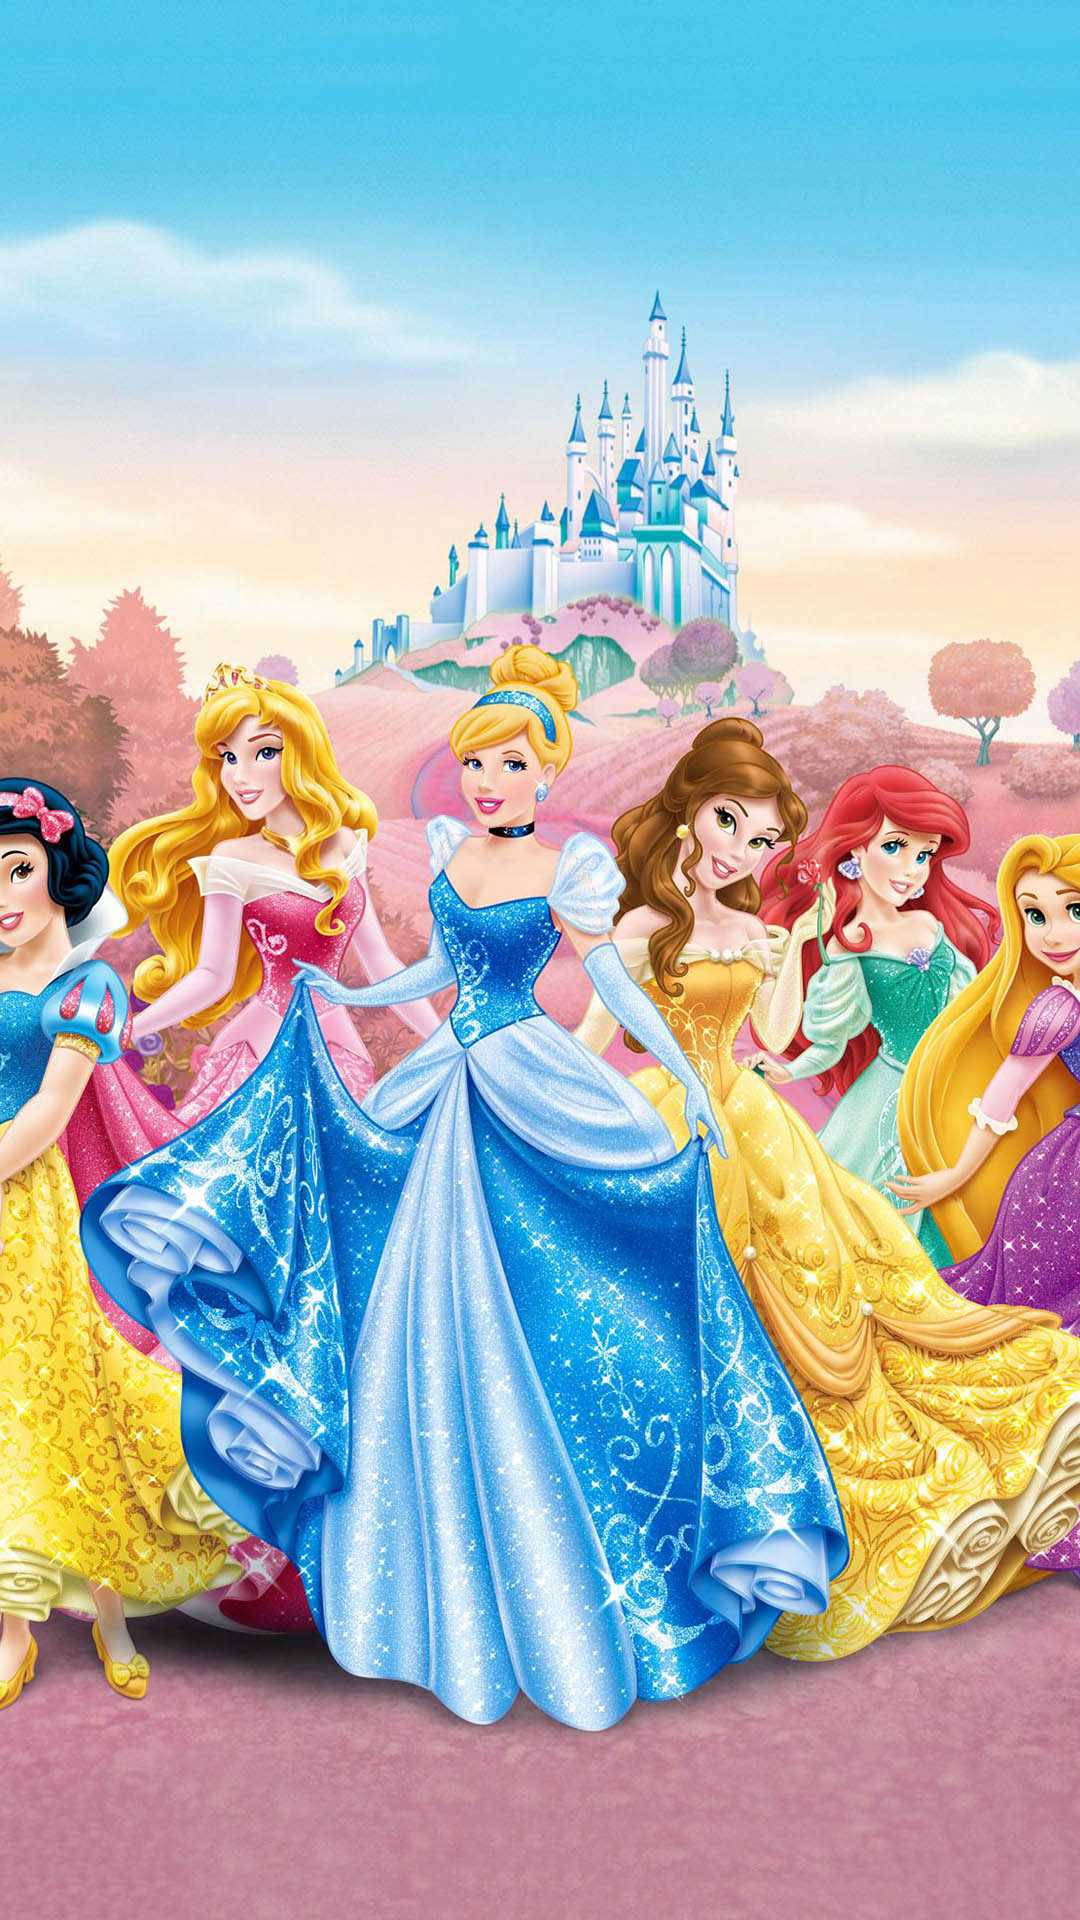 Download A dream is a wish your heart makes Create your own magical  fairytale with this whimsical Cute Aesthetic Disney Princess wallpaper  Wallpaper  Wallpaperscom